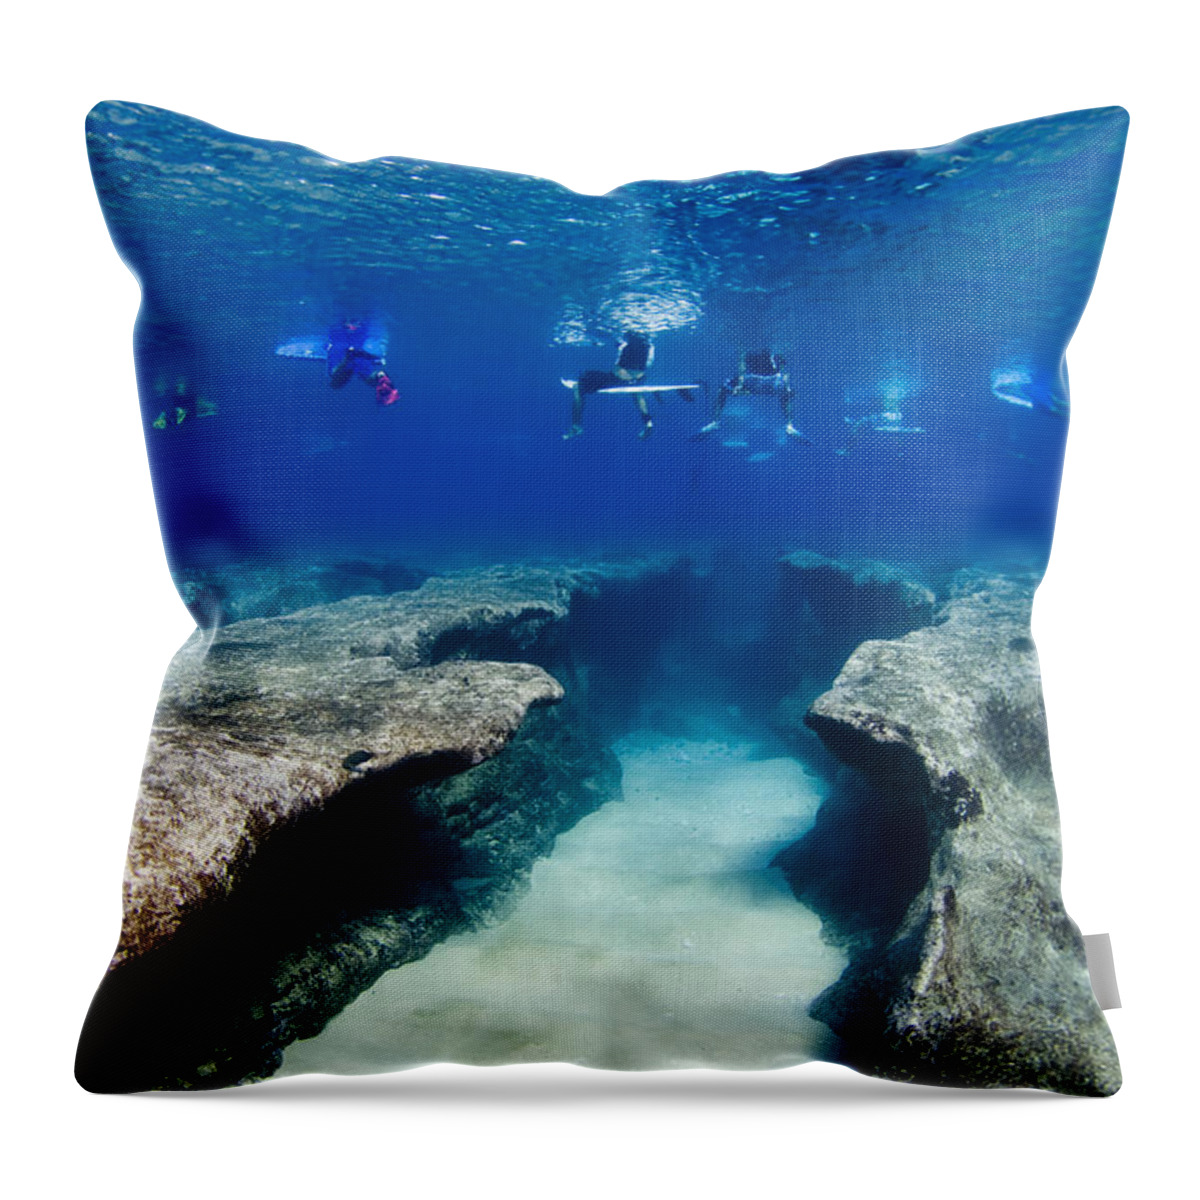 Surf Throw Pillow featuring the photograph Pipeline's Hungry Reef by Sean Davey